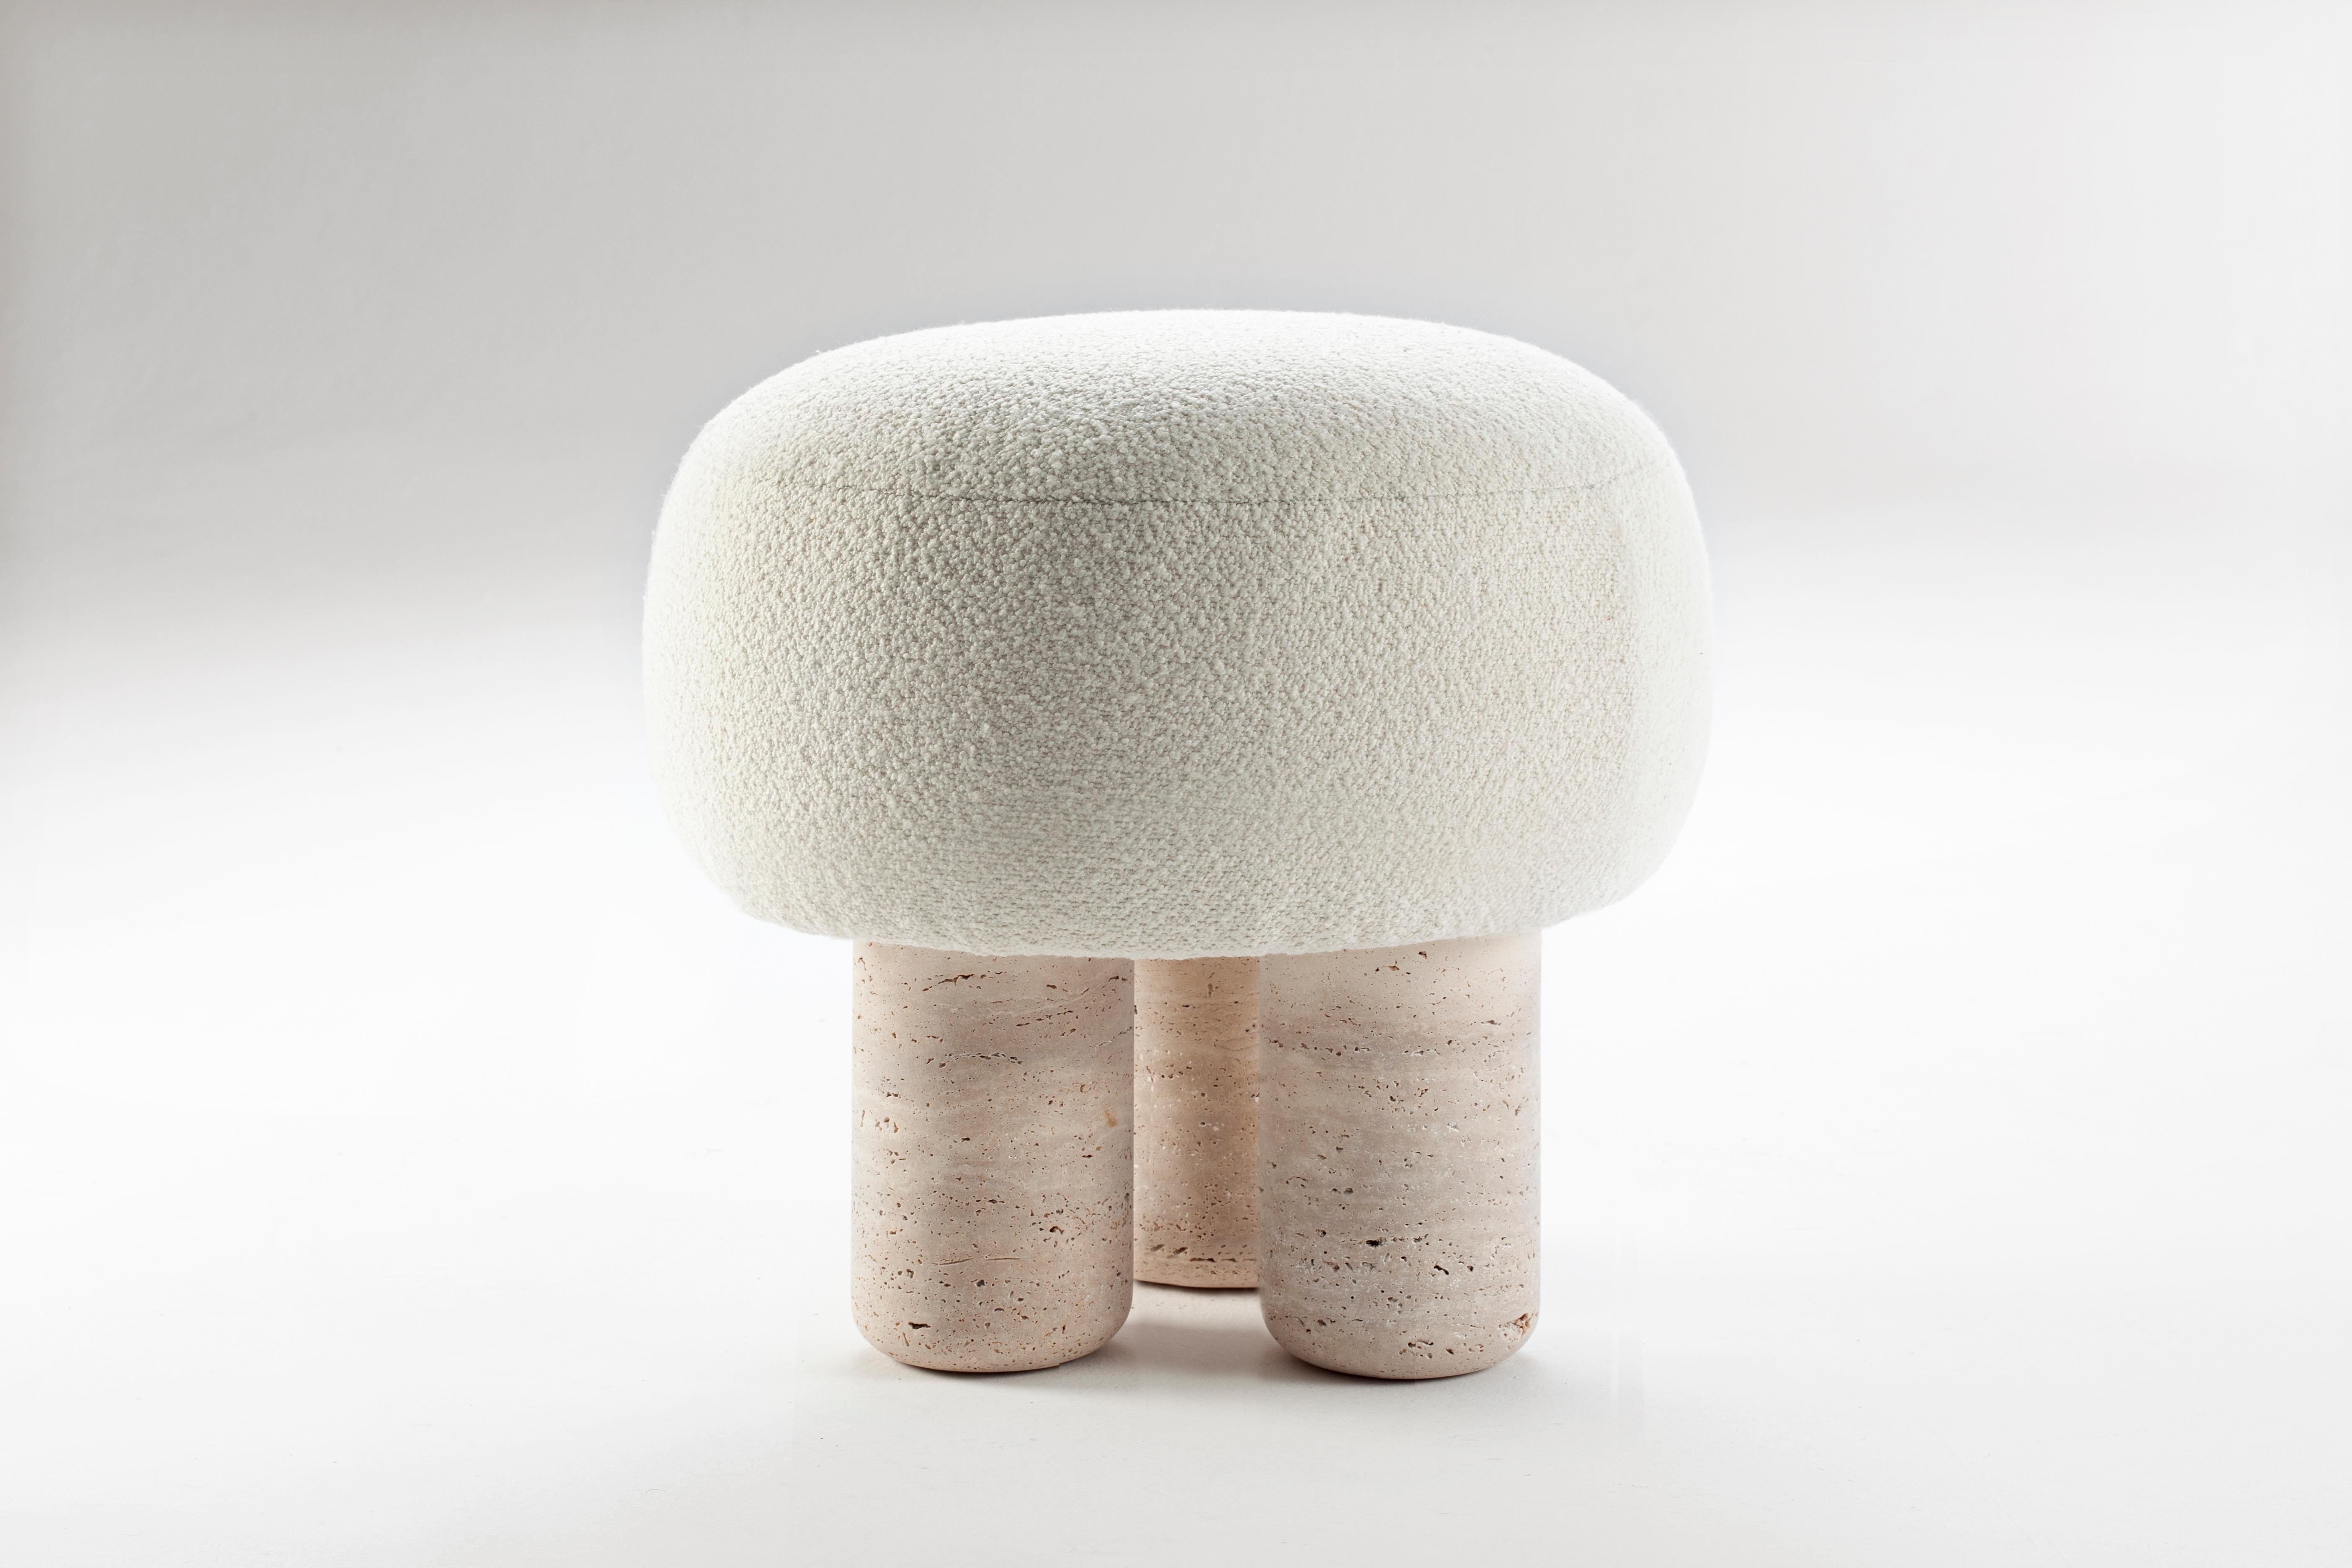 Unique Hygge Stool by Collector
Dimensions: D 45 x H 44 cm
Materials: Fabric, Travertino
Other materials available. Depending on the material the price may vary.

The Collector brand aims to be part of the daily life by fusing furniture to our home